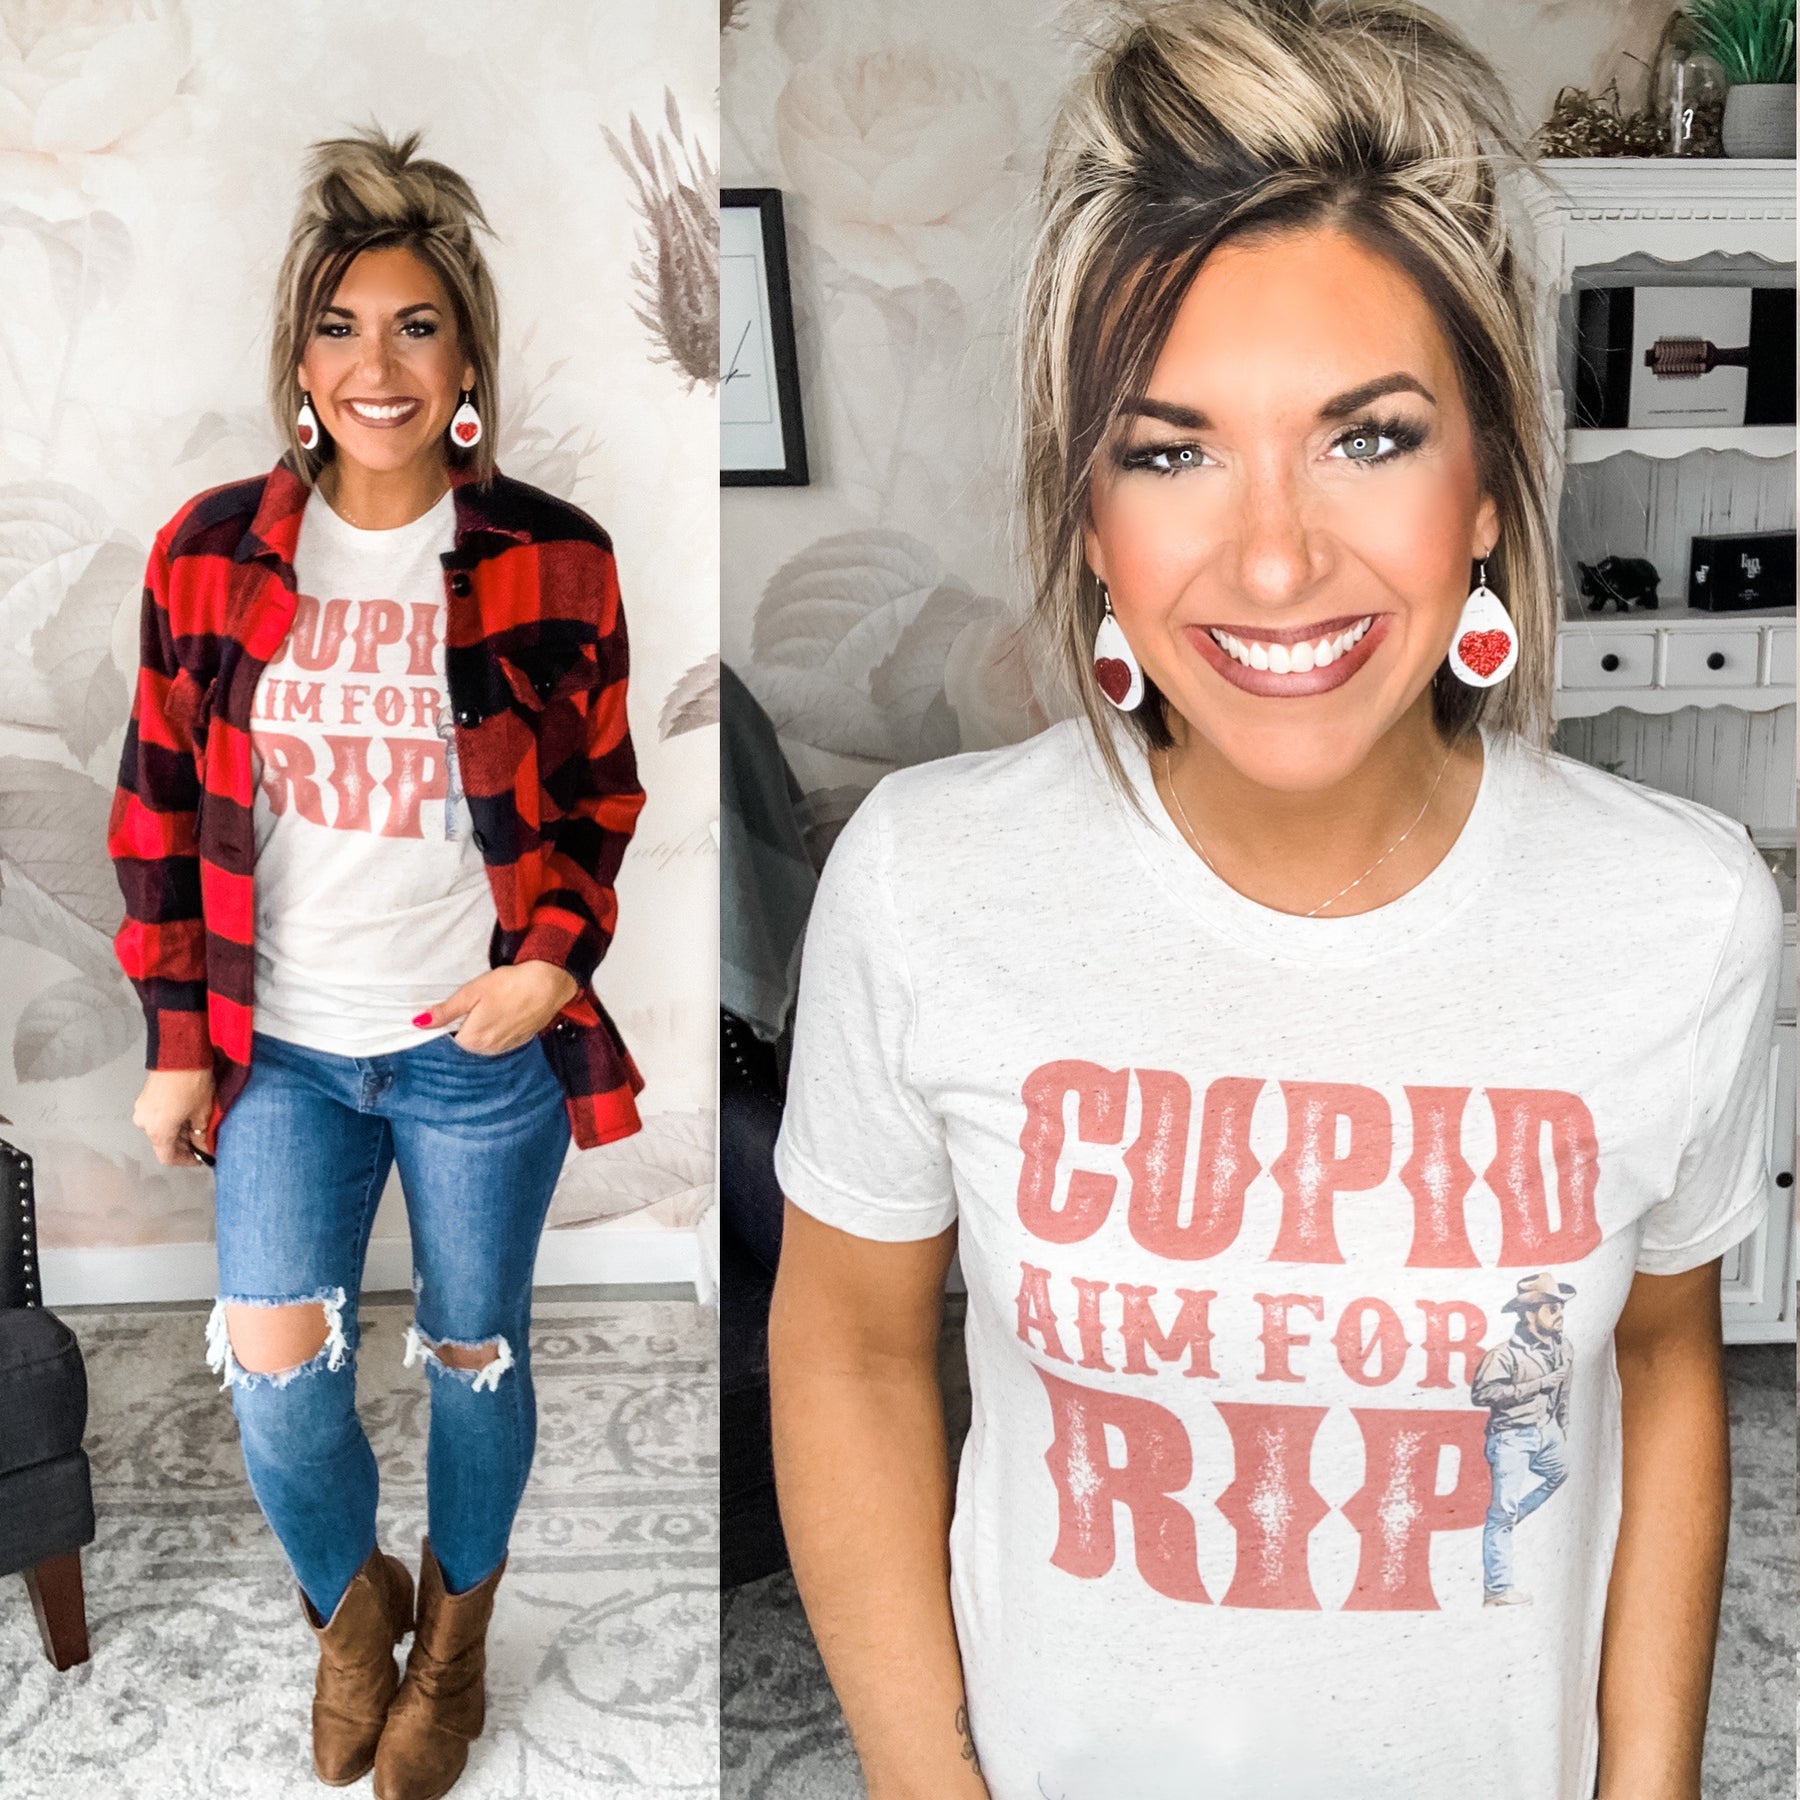 Cupid Aim For Rip Graphic Tee